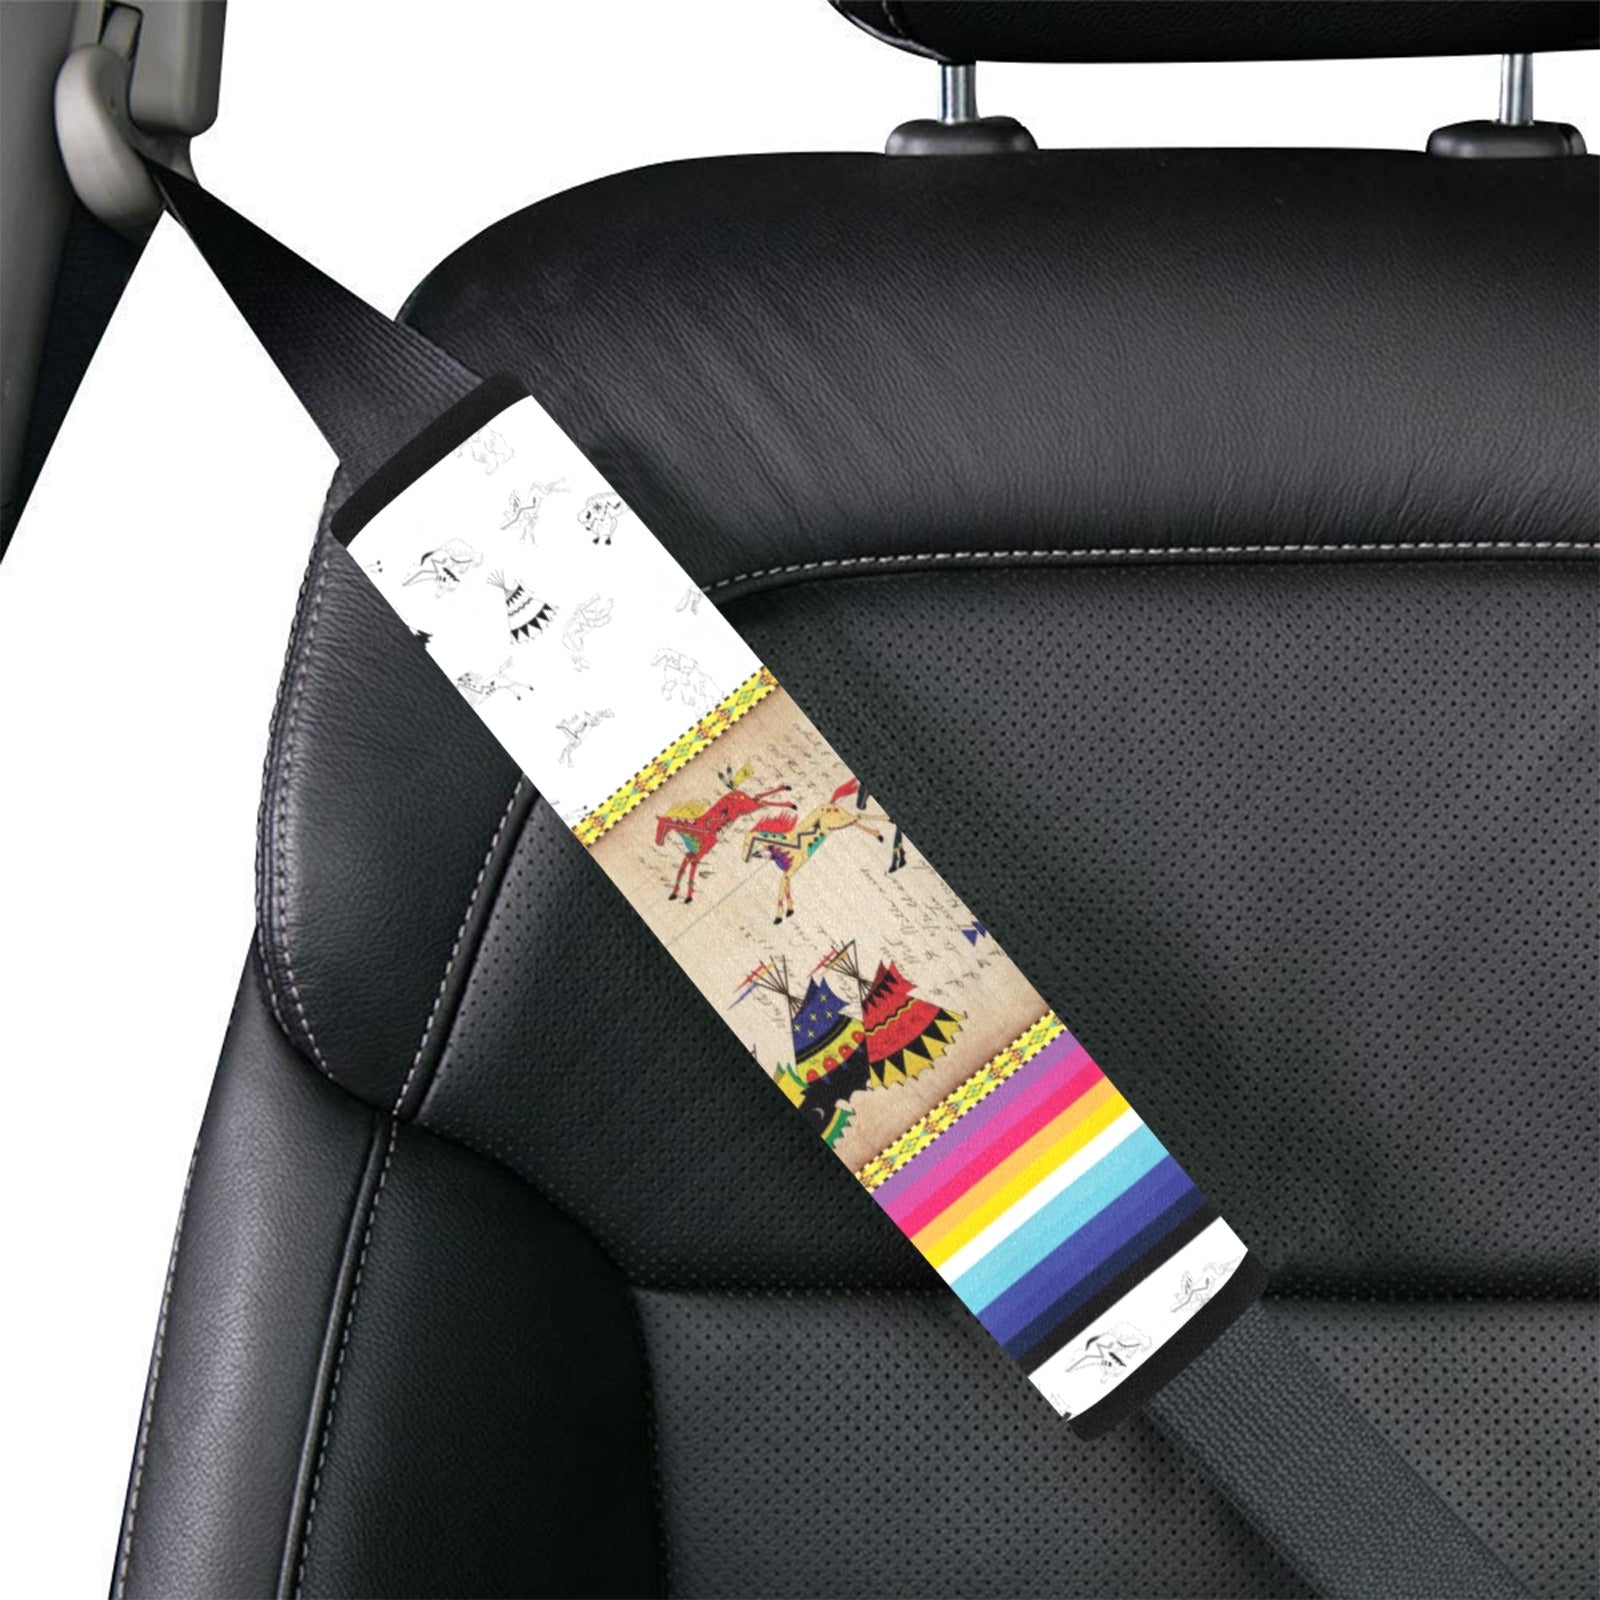 Horses Running White Clay Car Seat Belt Cover 7''x12.6'' (Pack of 2)